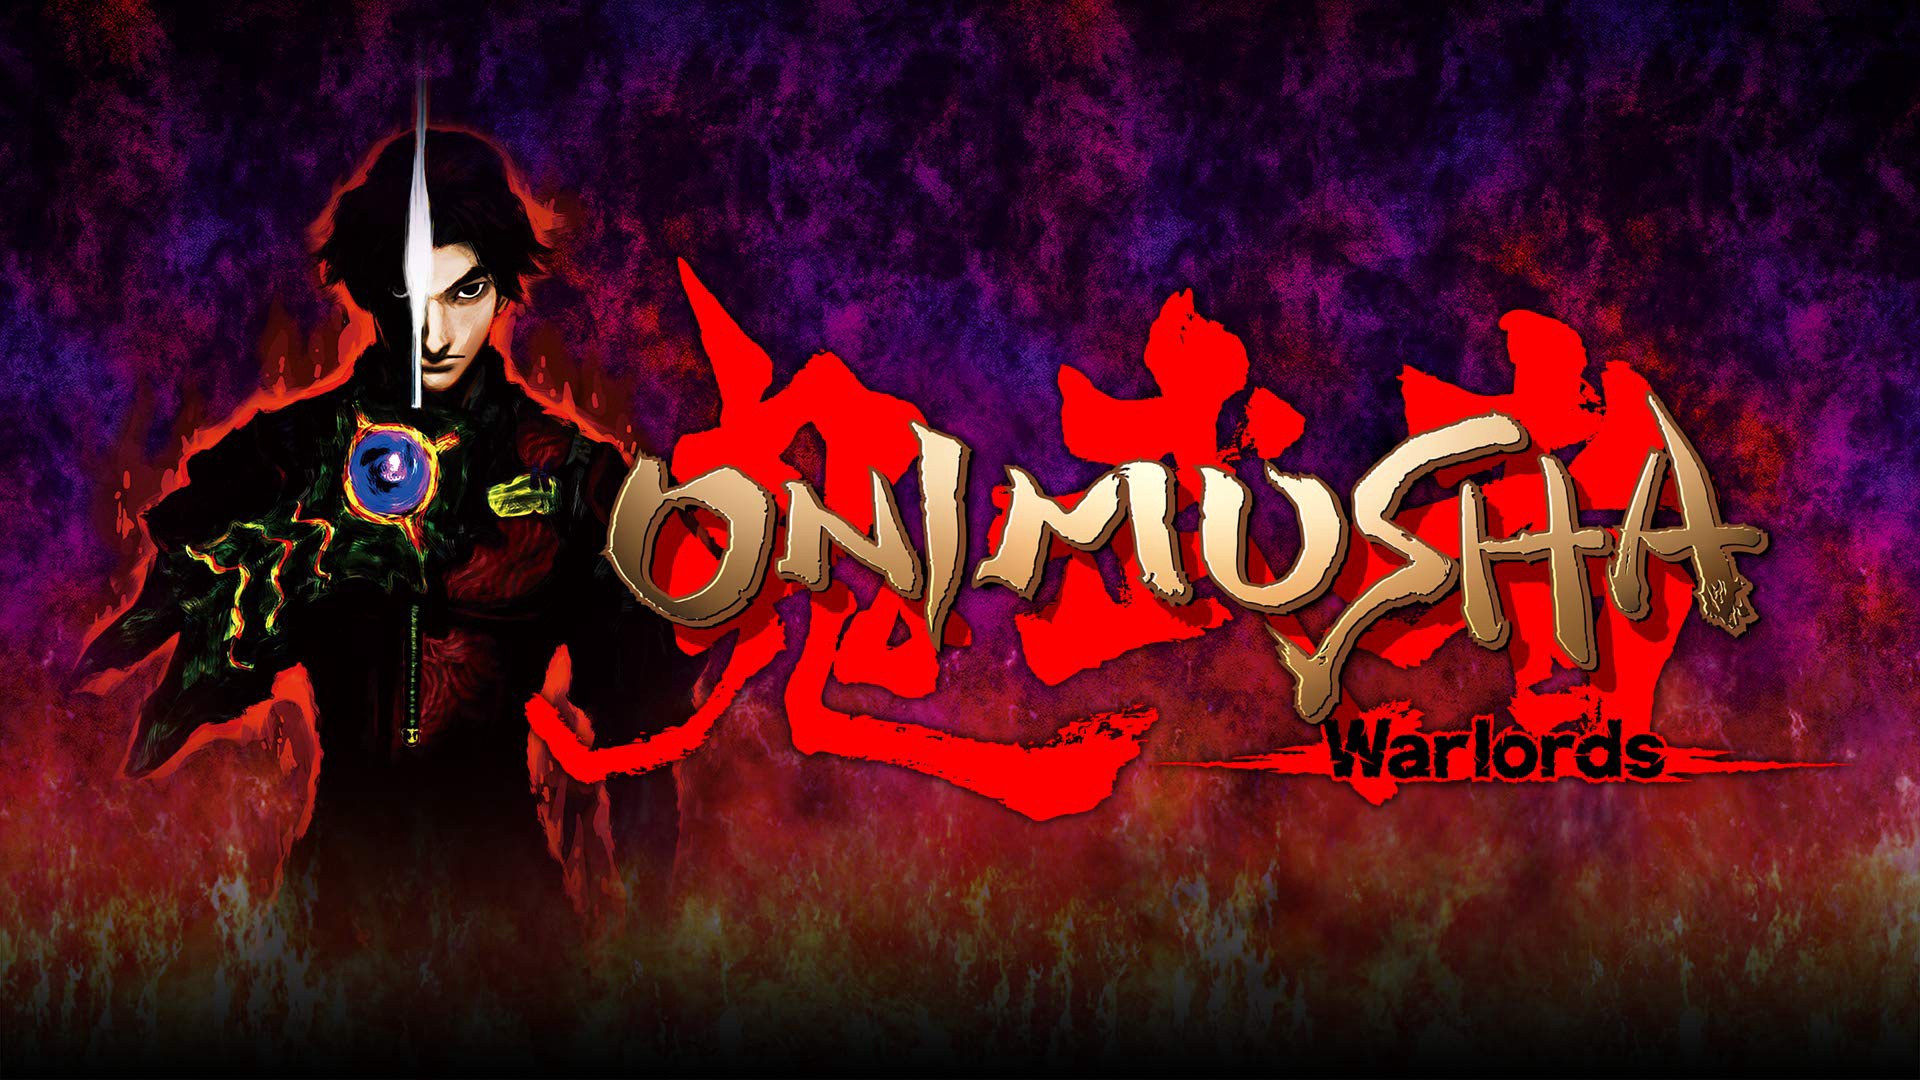 Onimusha Warlords PC Game Download For Free